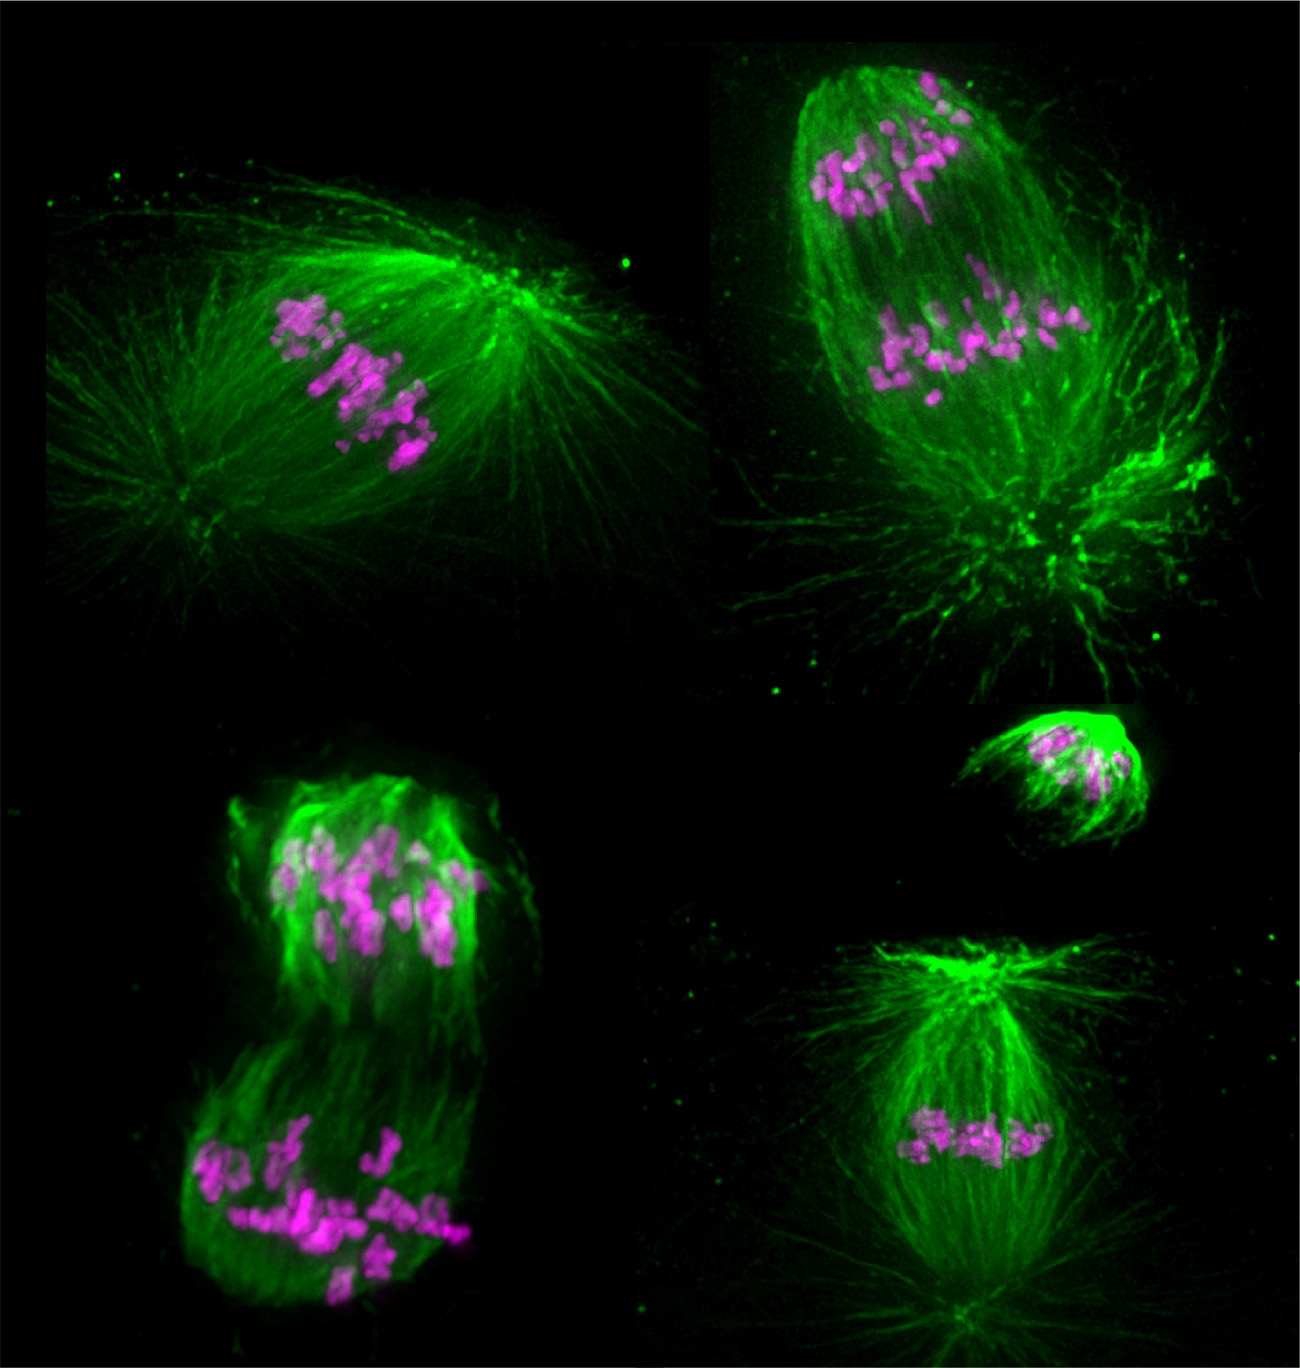 Timecourse of meiotic cell division in a sea star oocyte (egg cell). Green is microtubules, magenta is DNA. Credit: Zak Swartz